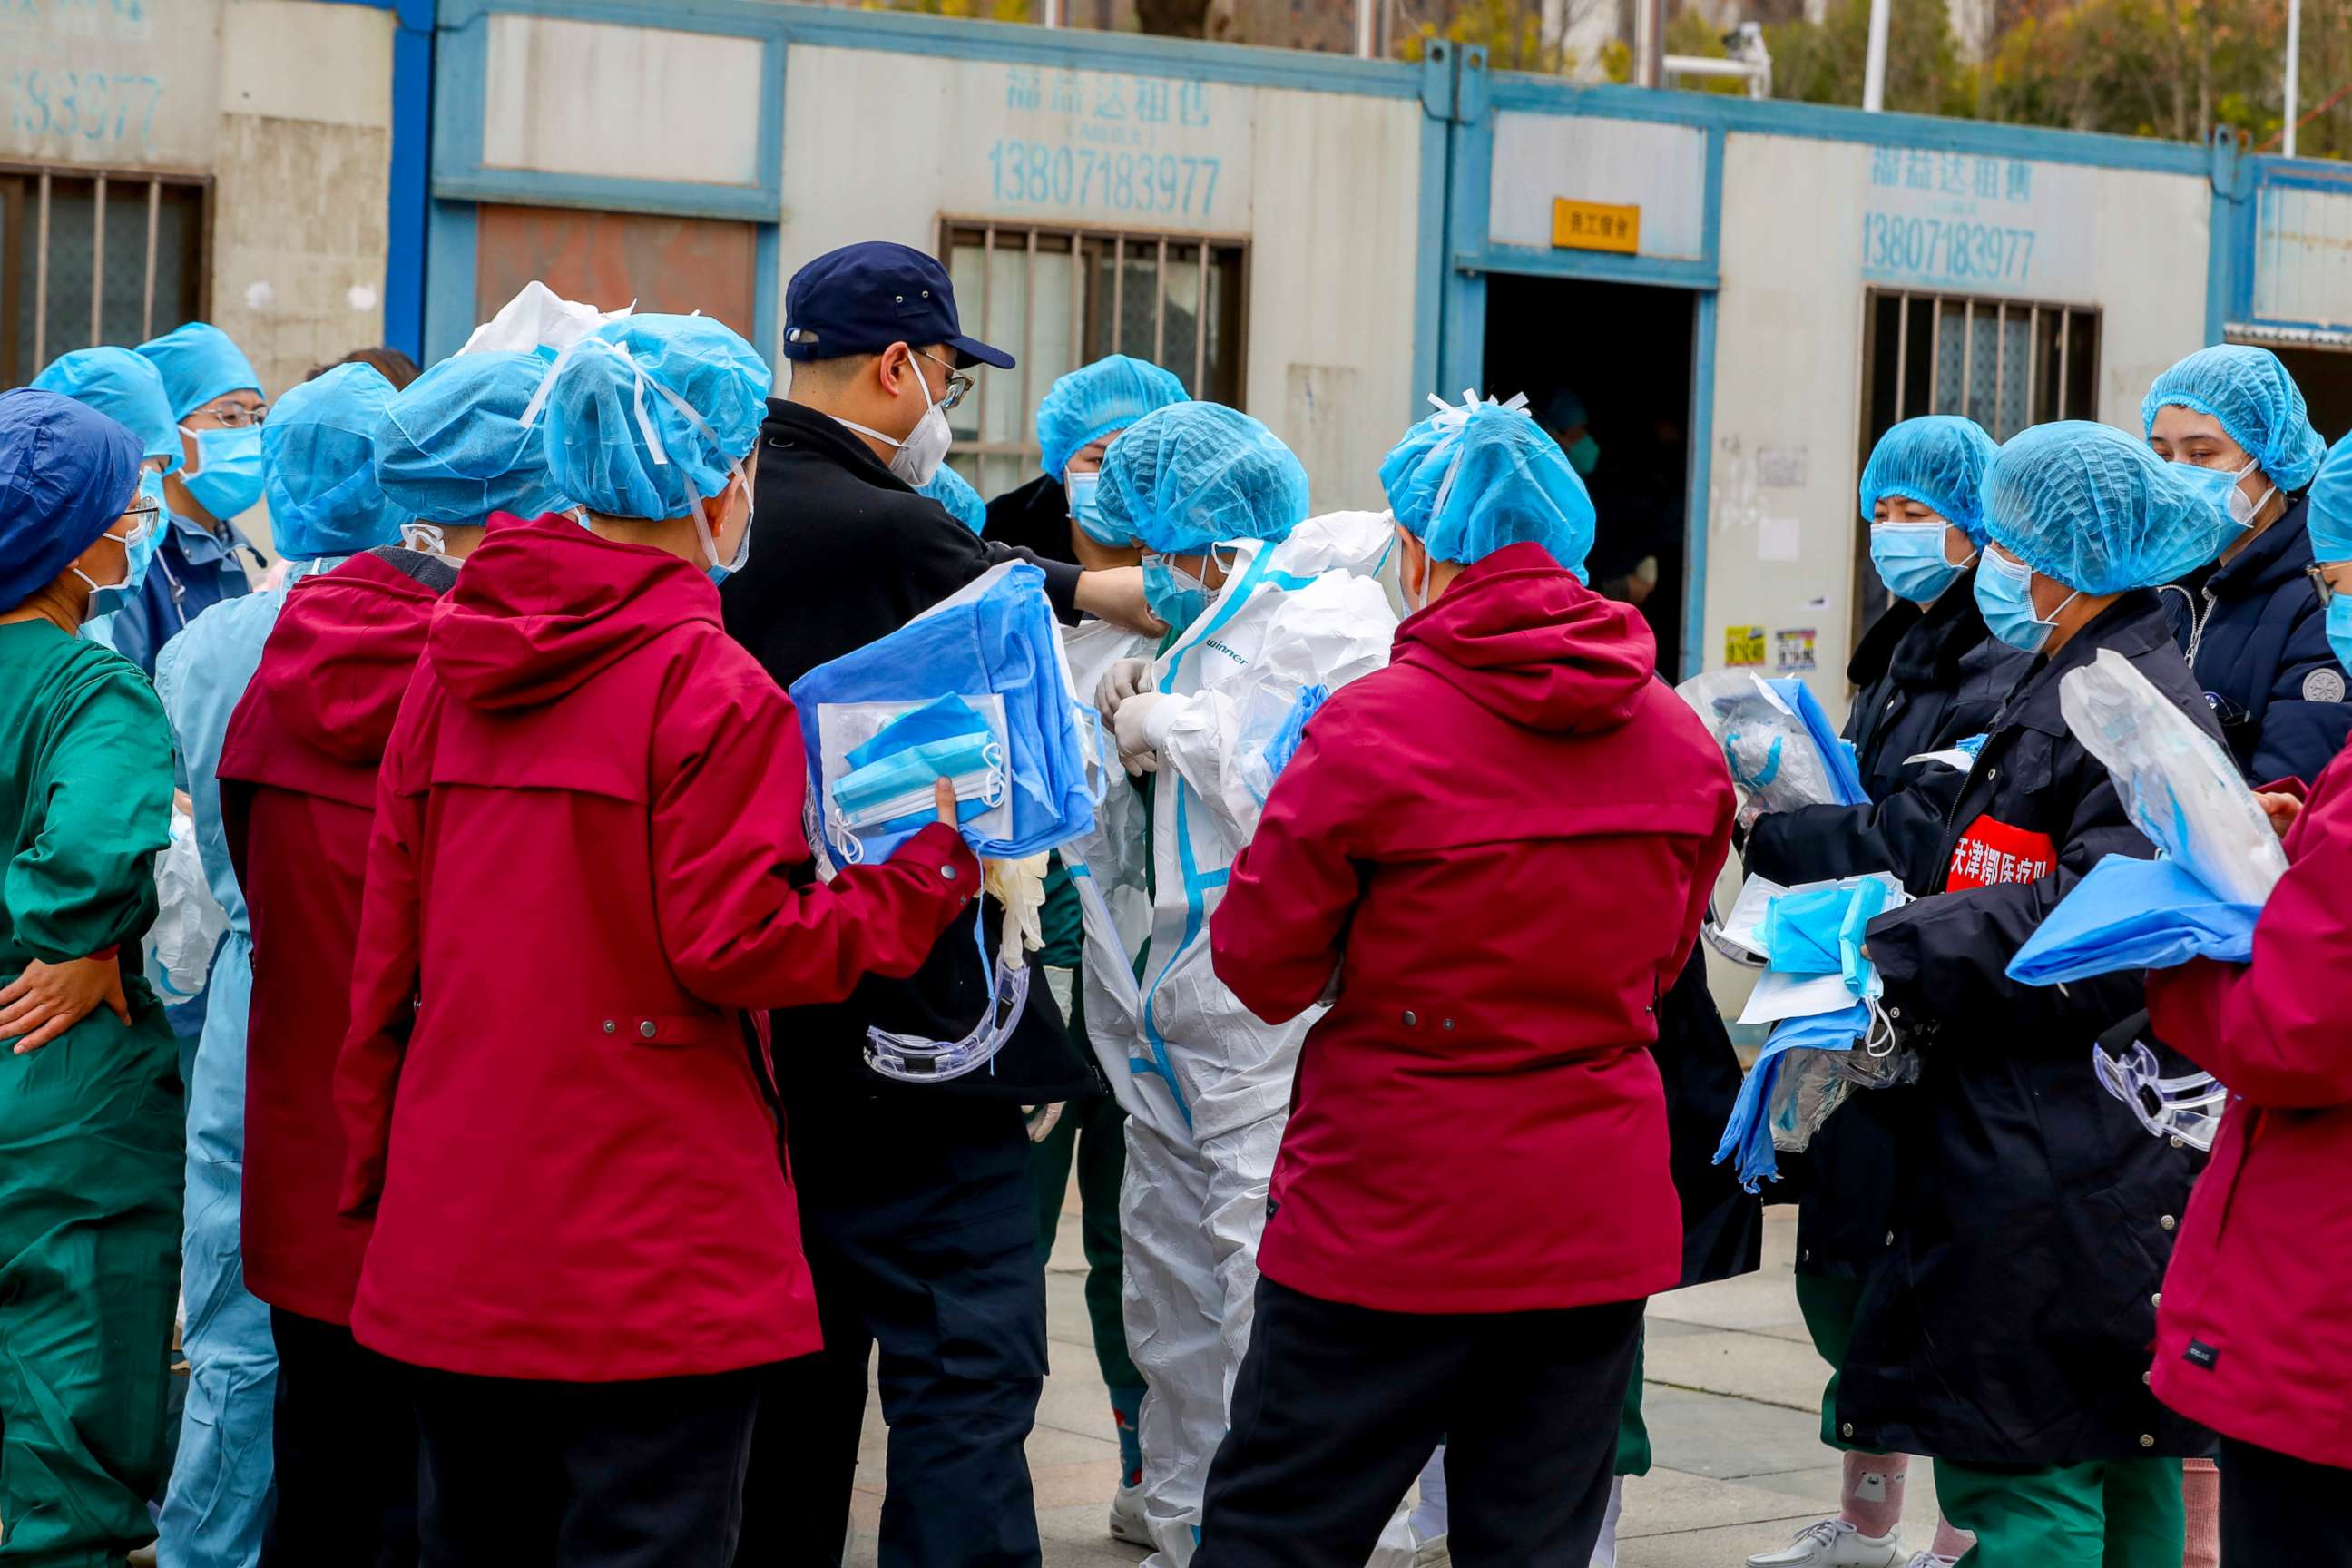 PHOTO: A medical worker puts on a protective suit before entering a sports center which has been converted into a makeshift hospital to treat patients of the novel coronavirus, in Wuhan, Hubei province, China, Feb. 12, 2020.